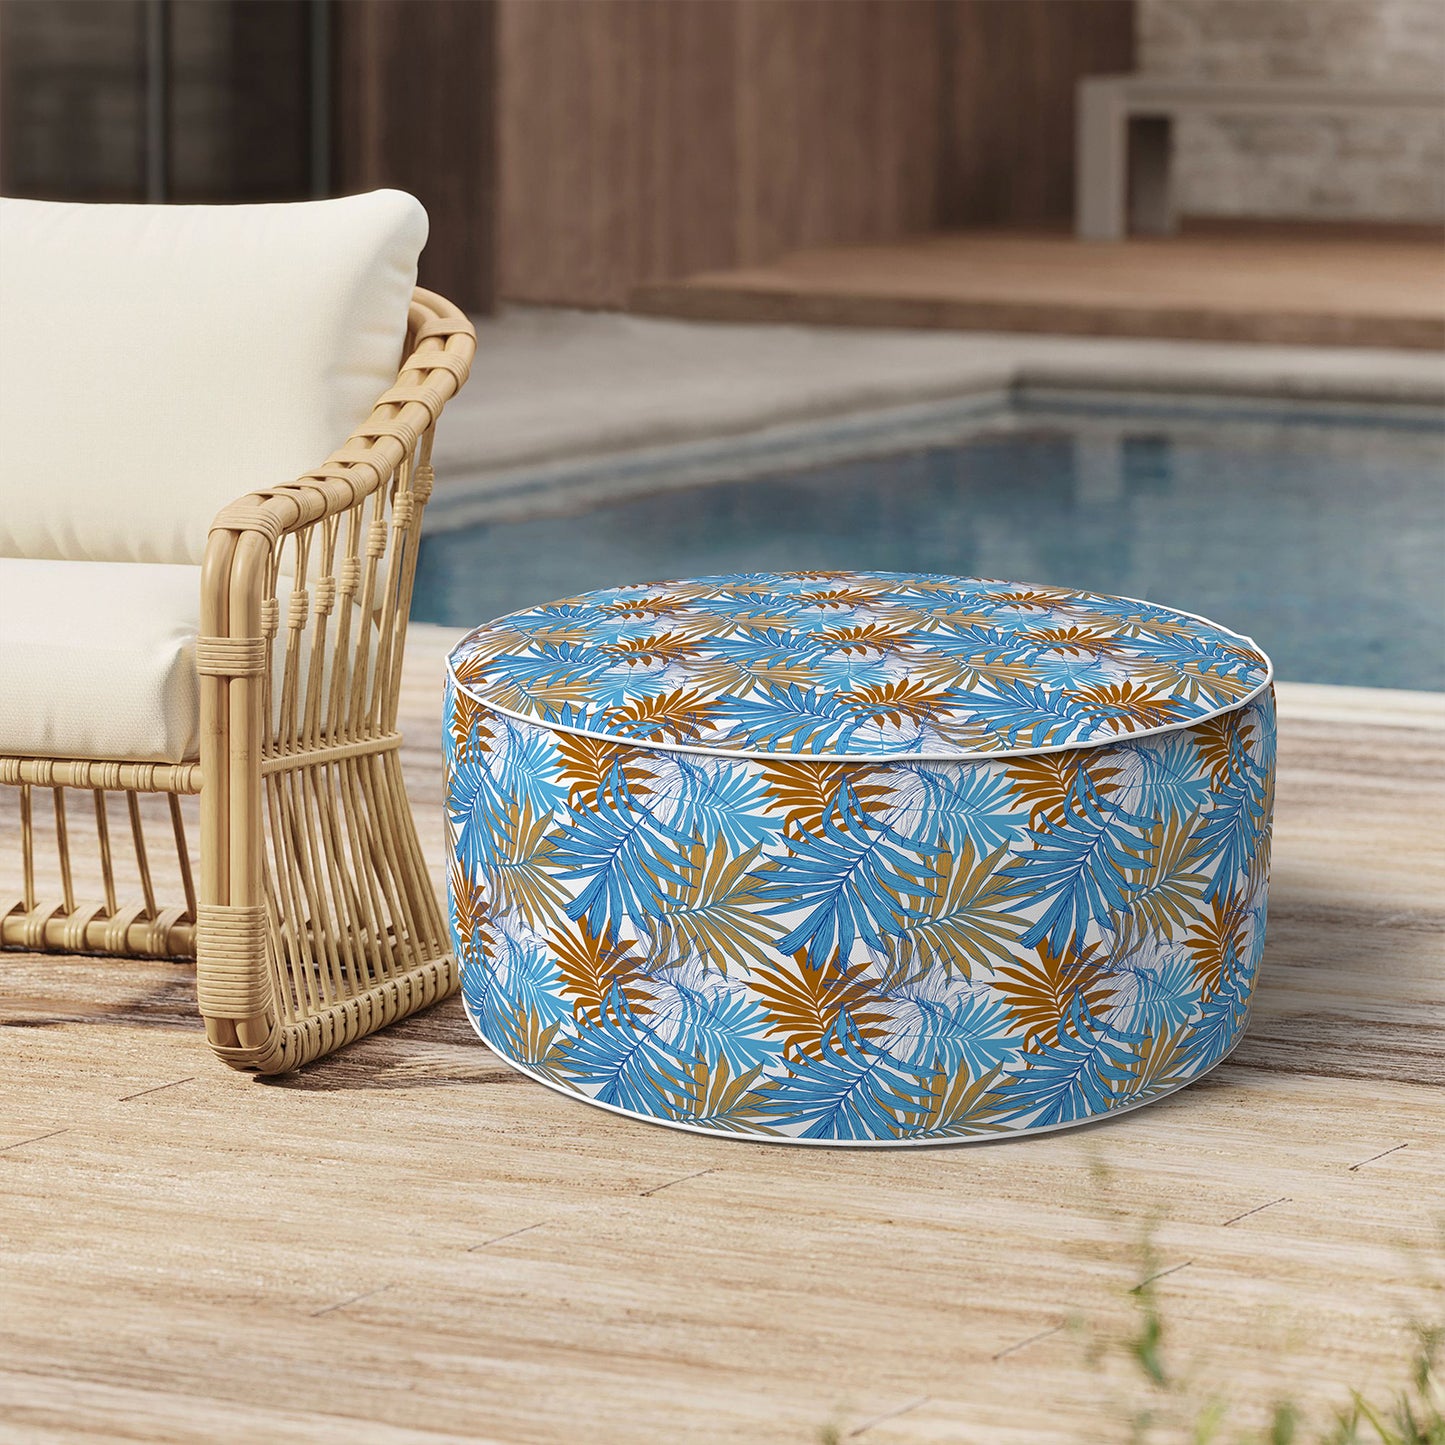 Outdoor Inflatable Stool Ottoman, All Weather Portable Footrest Stool, Furniture Stool Ottomans for Home Garden Beach, D31”xH14”, Piermont Leaves Blue